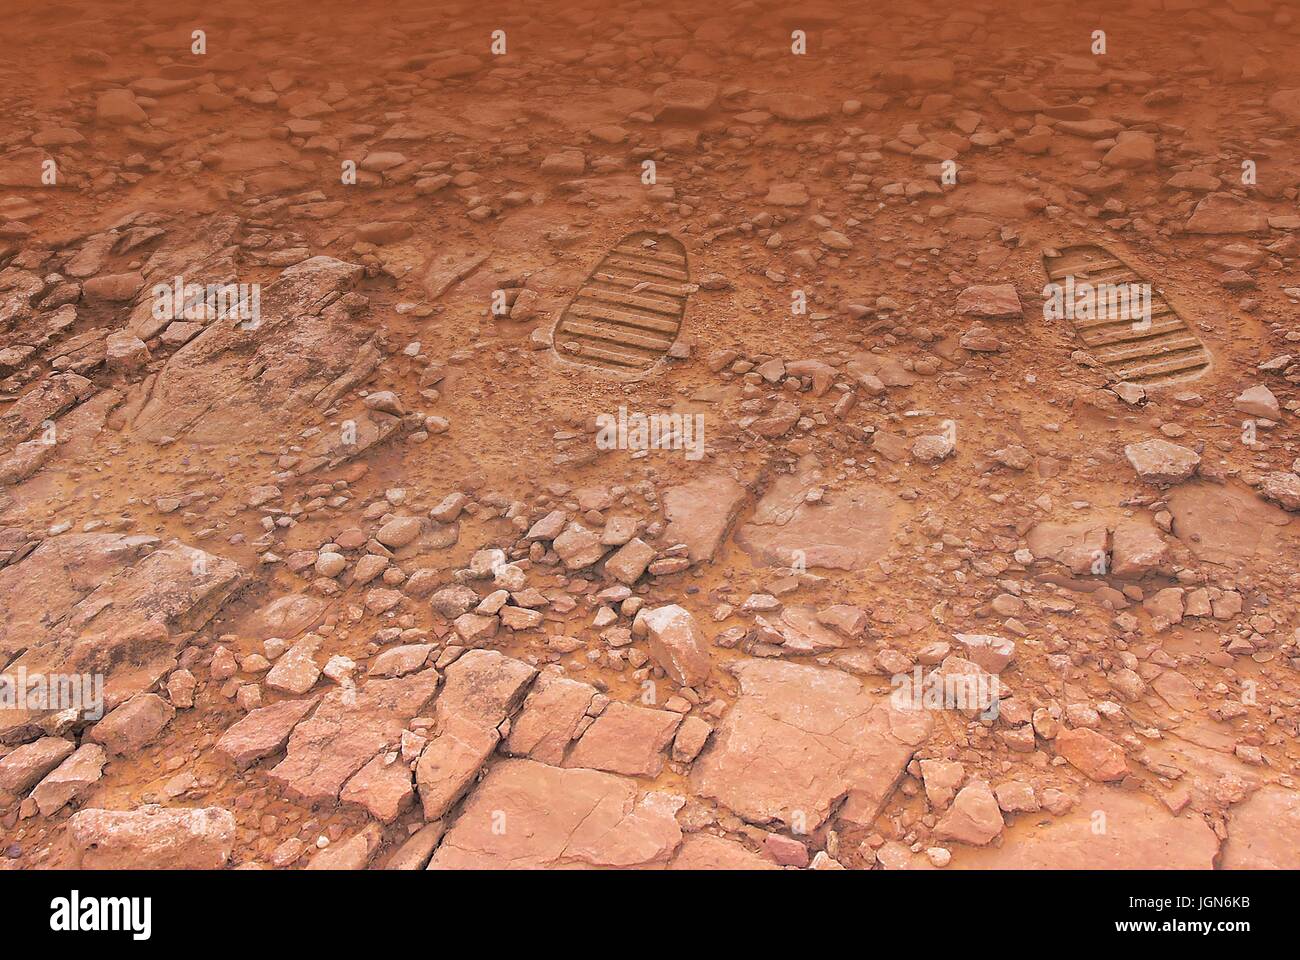 Footprints on Mars, artwork. An illustration of a pair of boot prints on the surface of the red planet, perhaps left behind by future astronauts â€“ or tourists. A human expedition to Mars would be a costly, dangerous but rewarding venture. Stock Photo